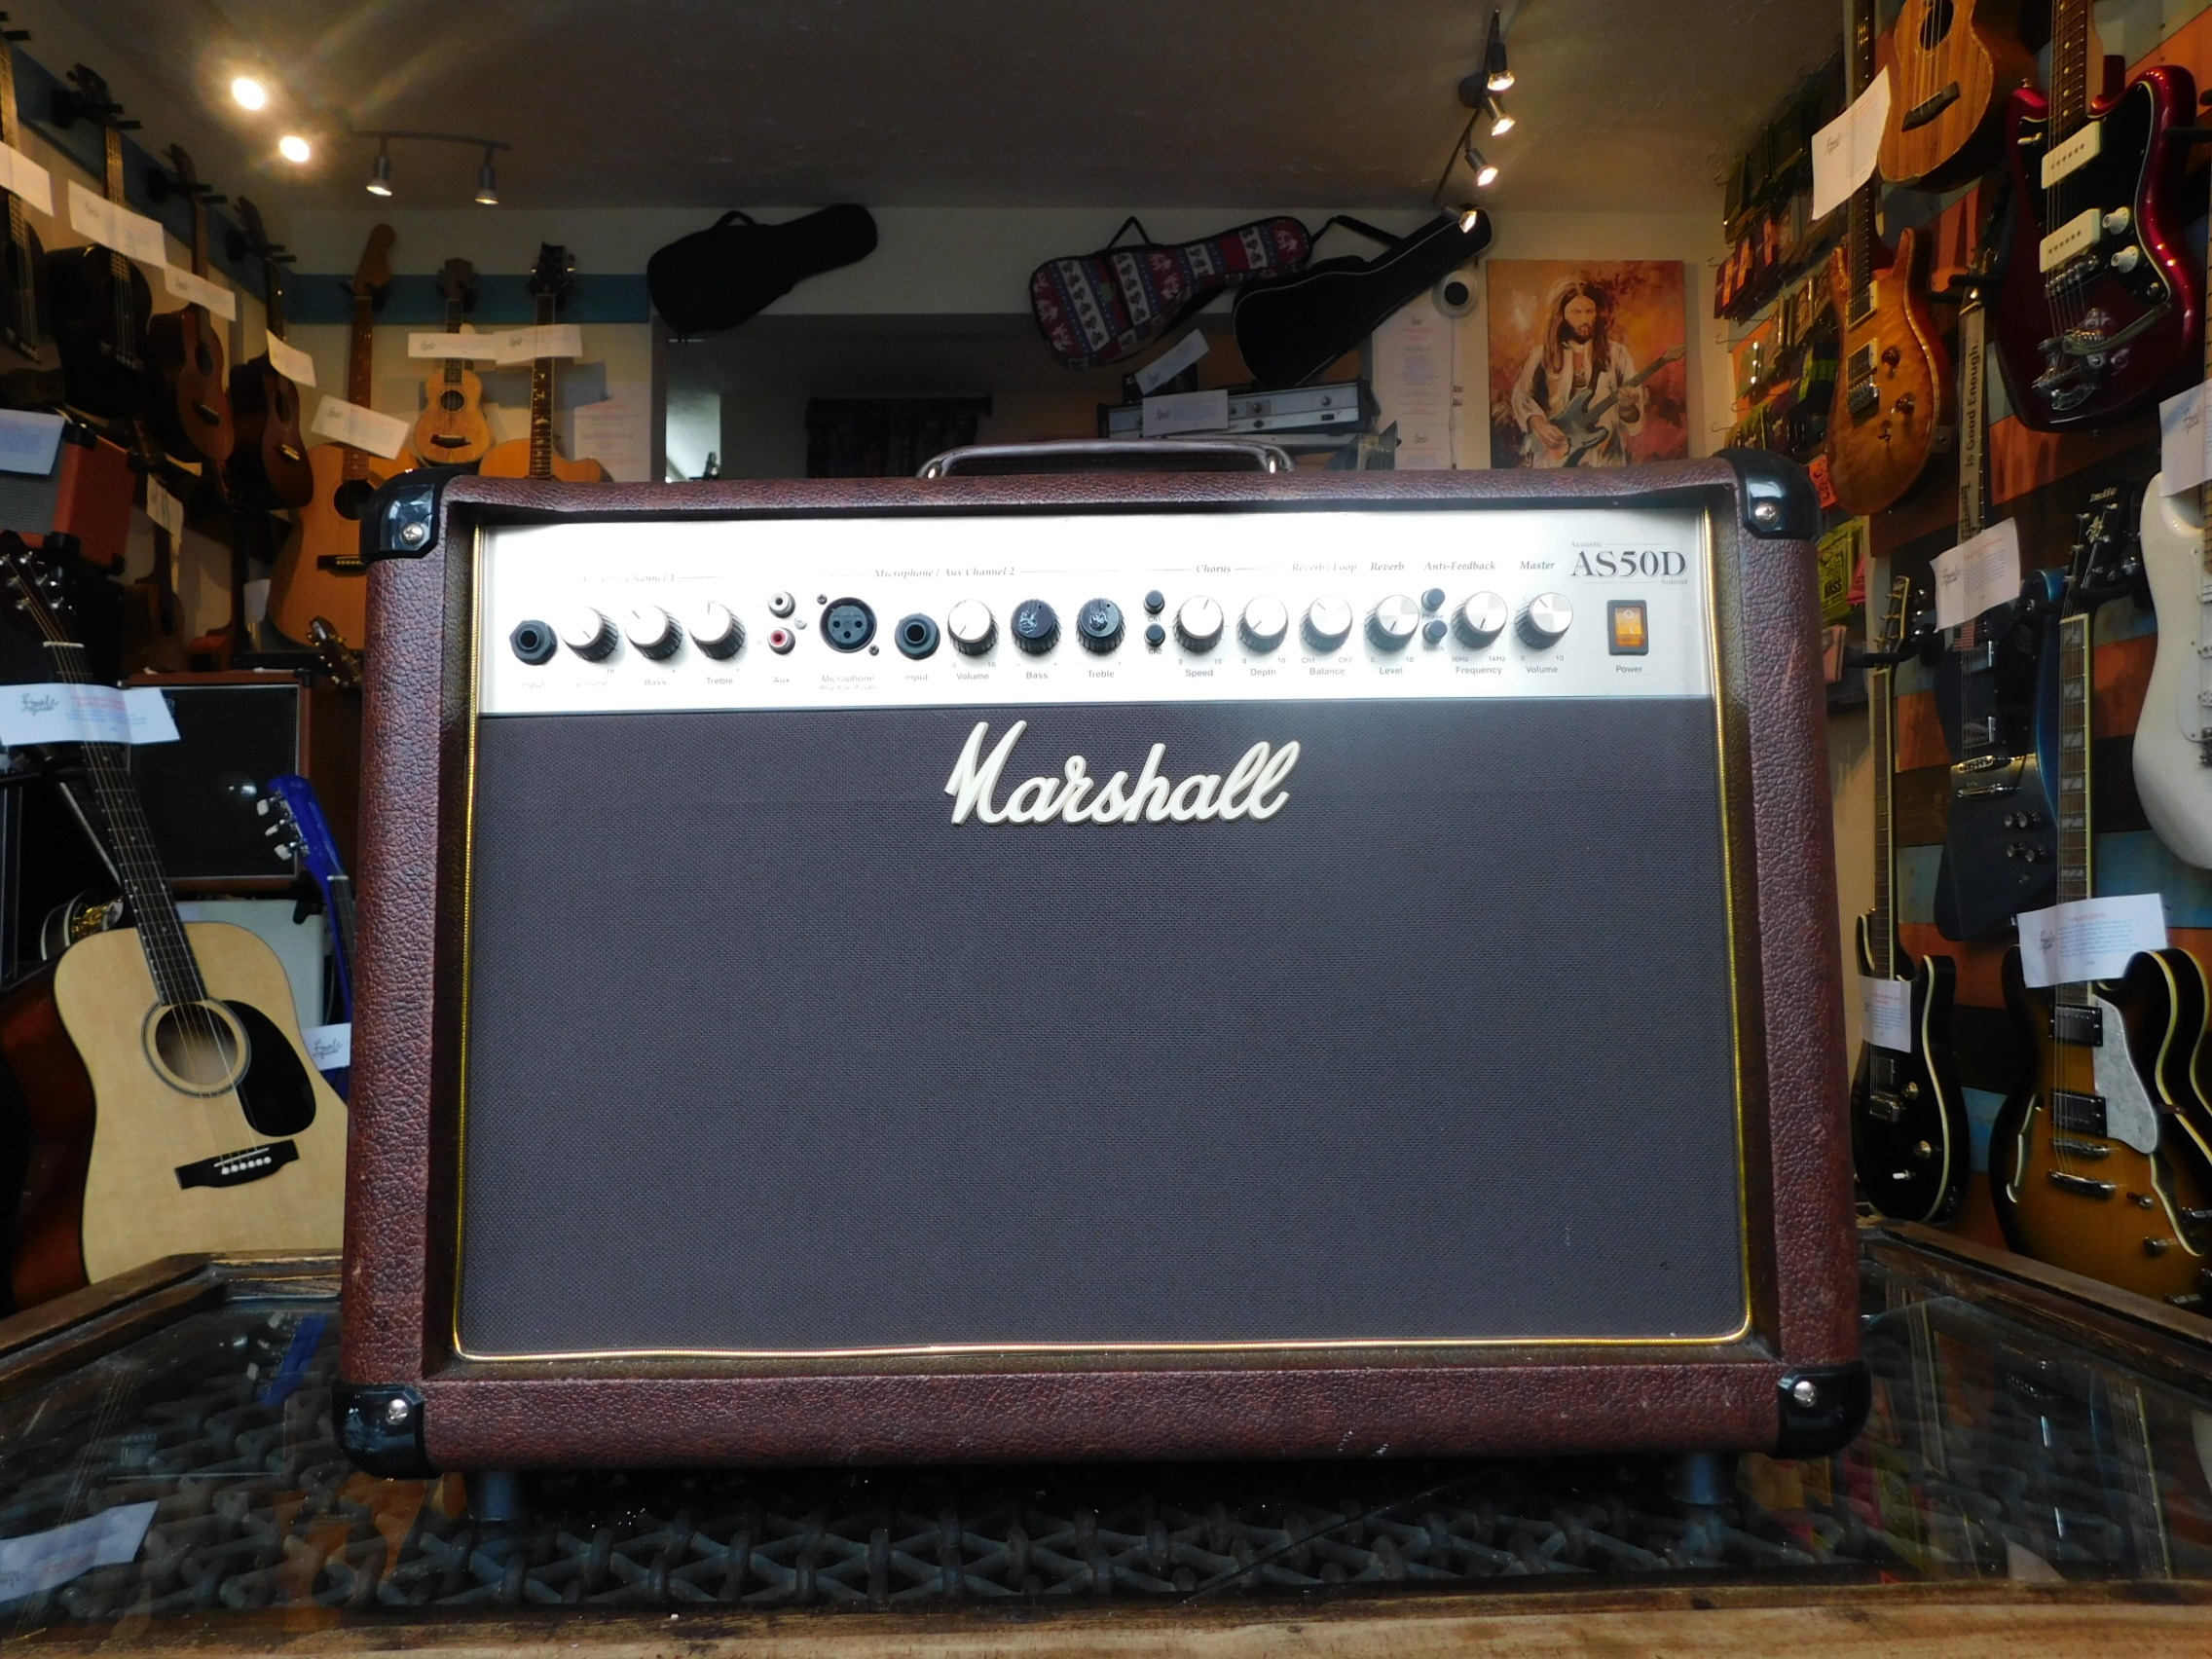 Marshall AS50D for sale in our Sheffield guitar shop, Finale Guitar